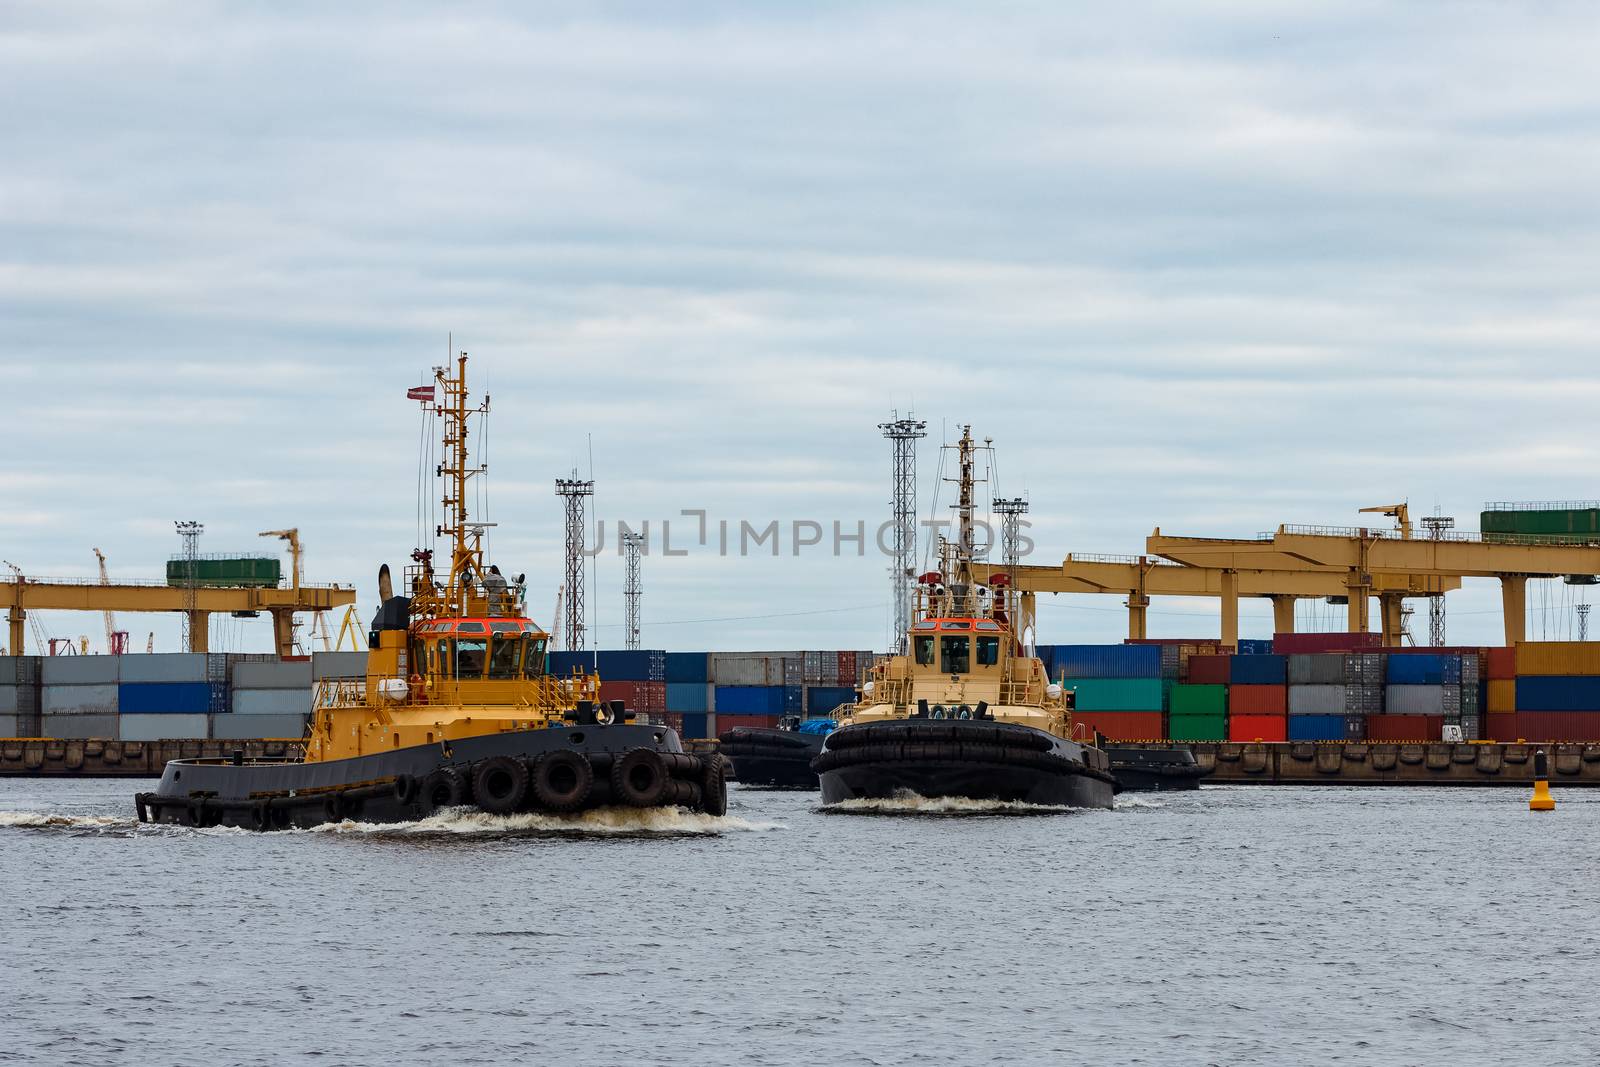 Tug ships in the cargo port by sengnsp